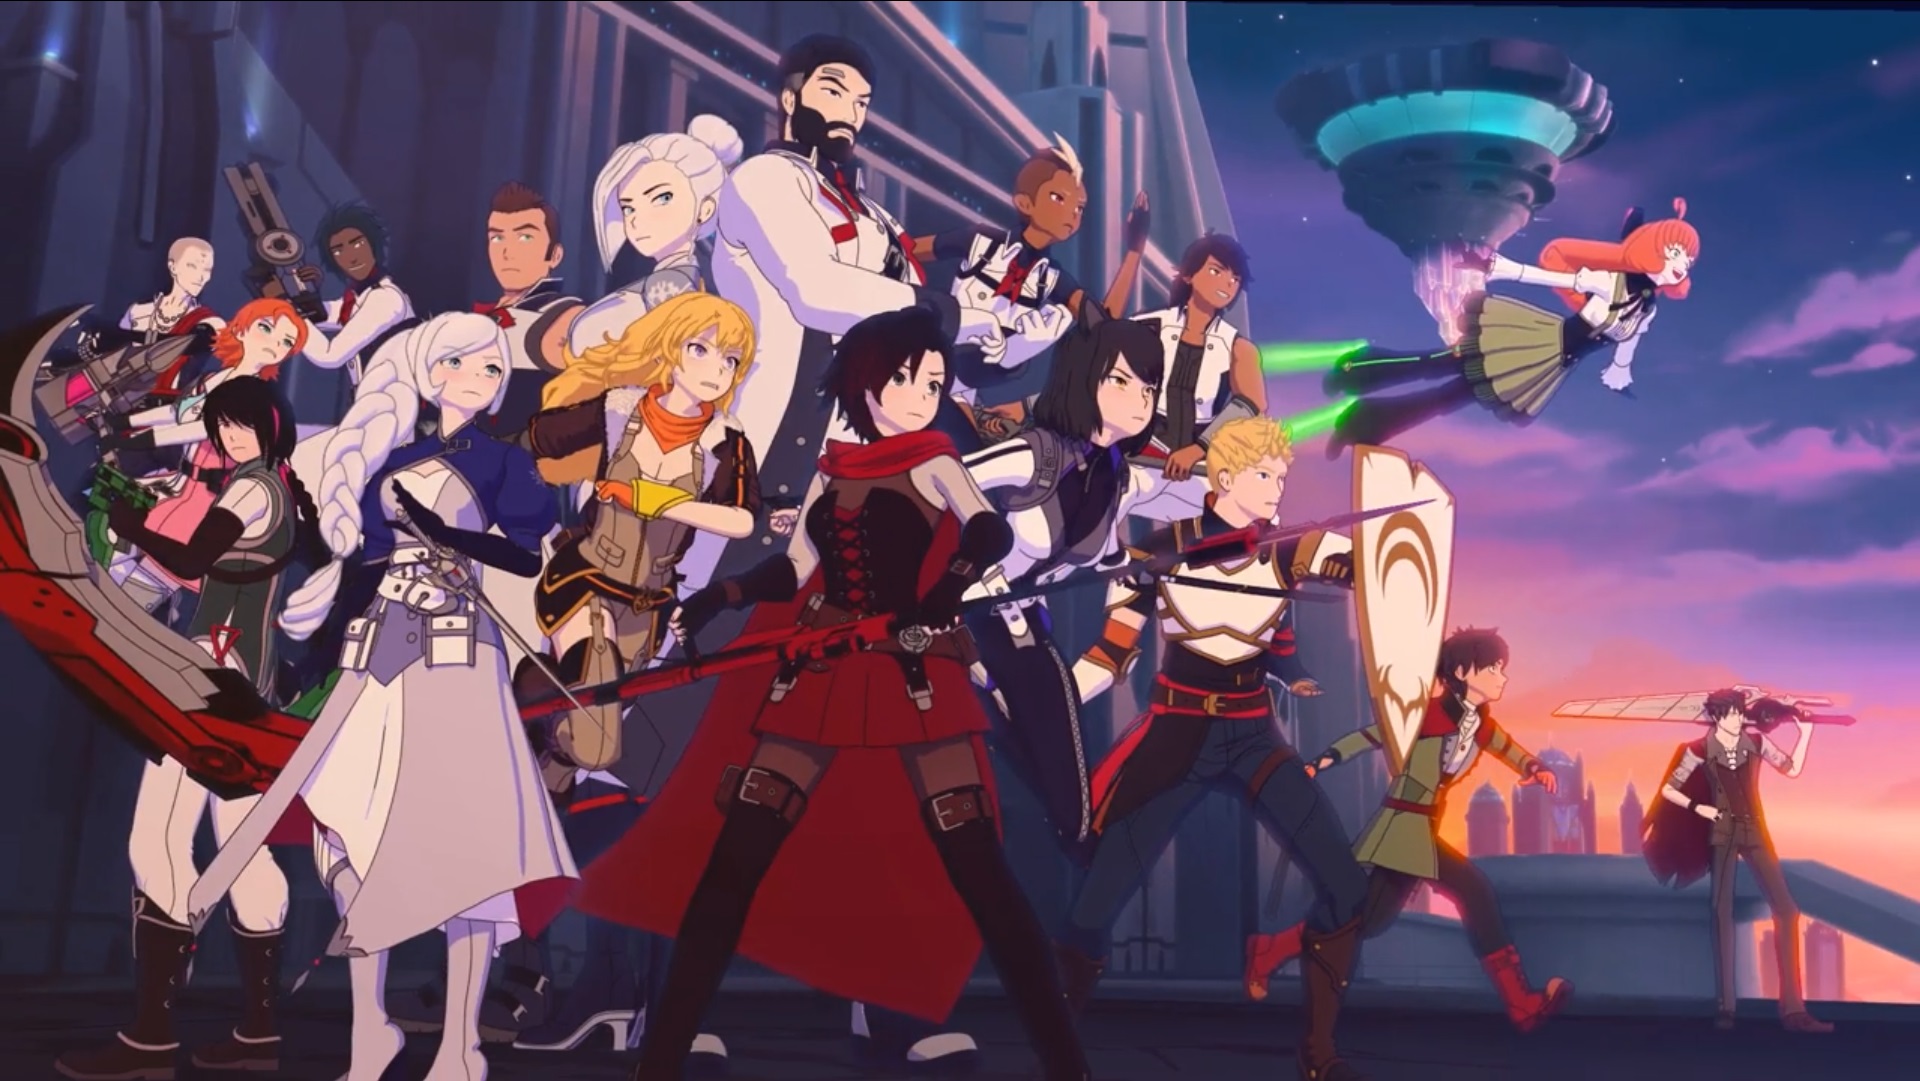 RWBY Season 7 is a Story of Secrets, Lies, and One Man’s Slide into